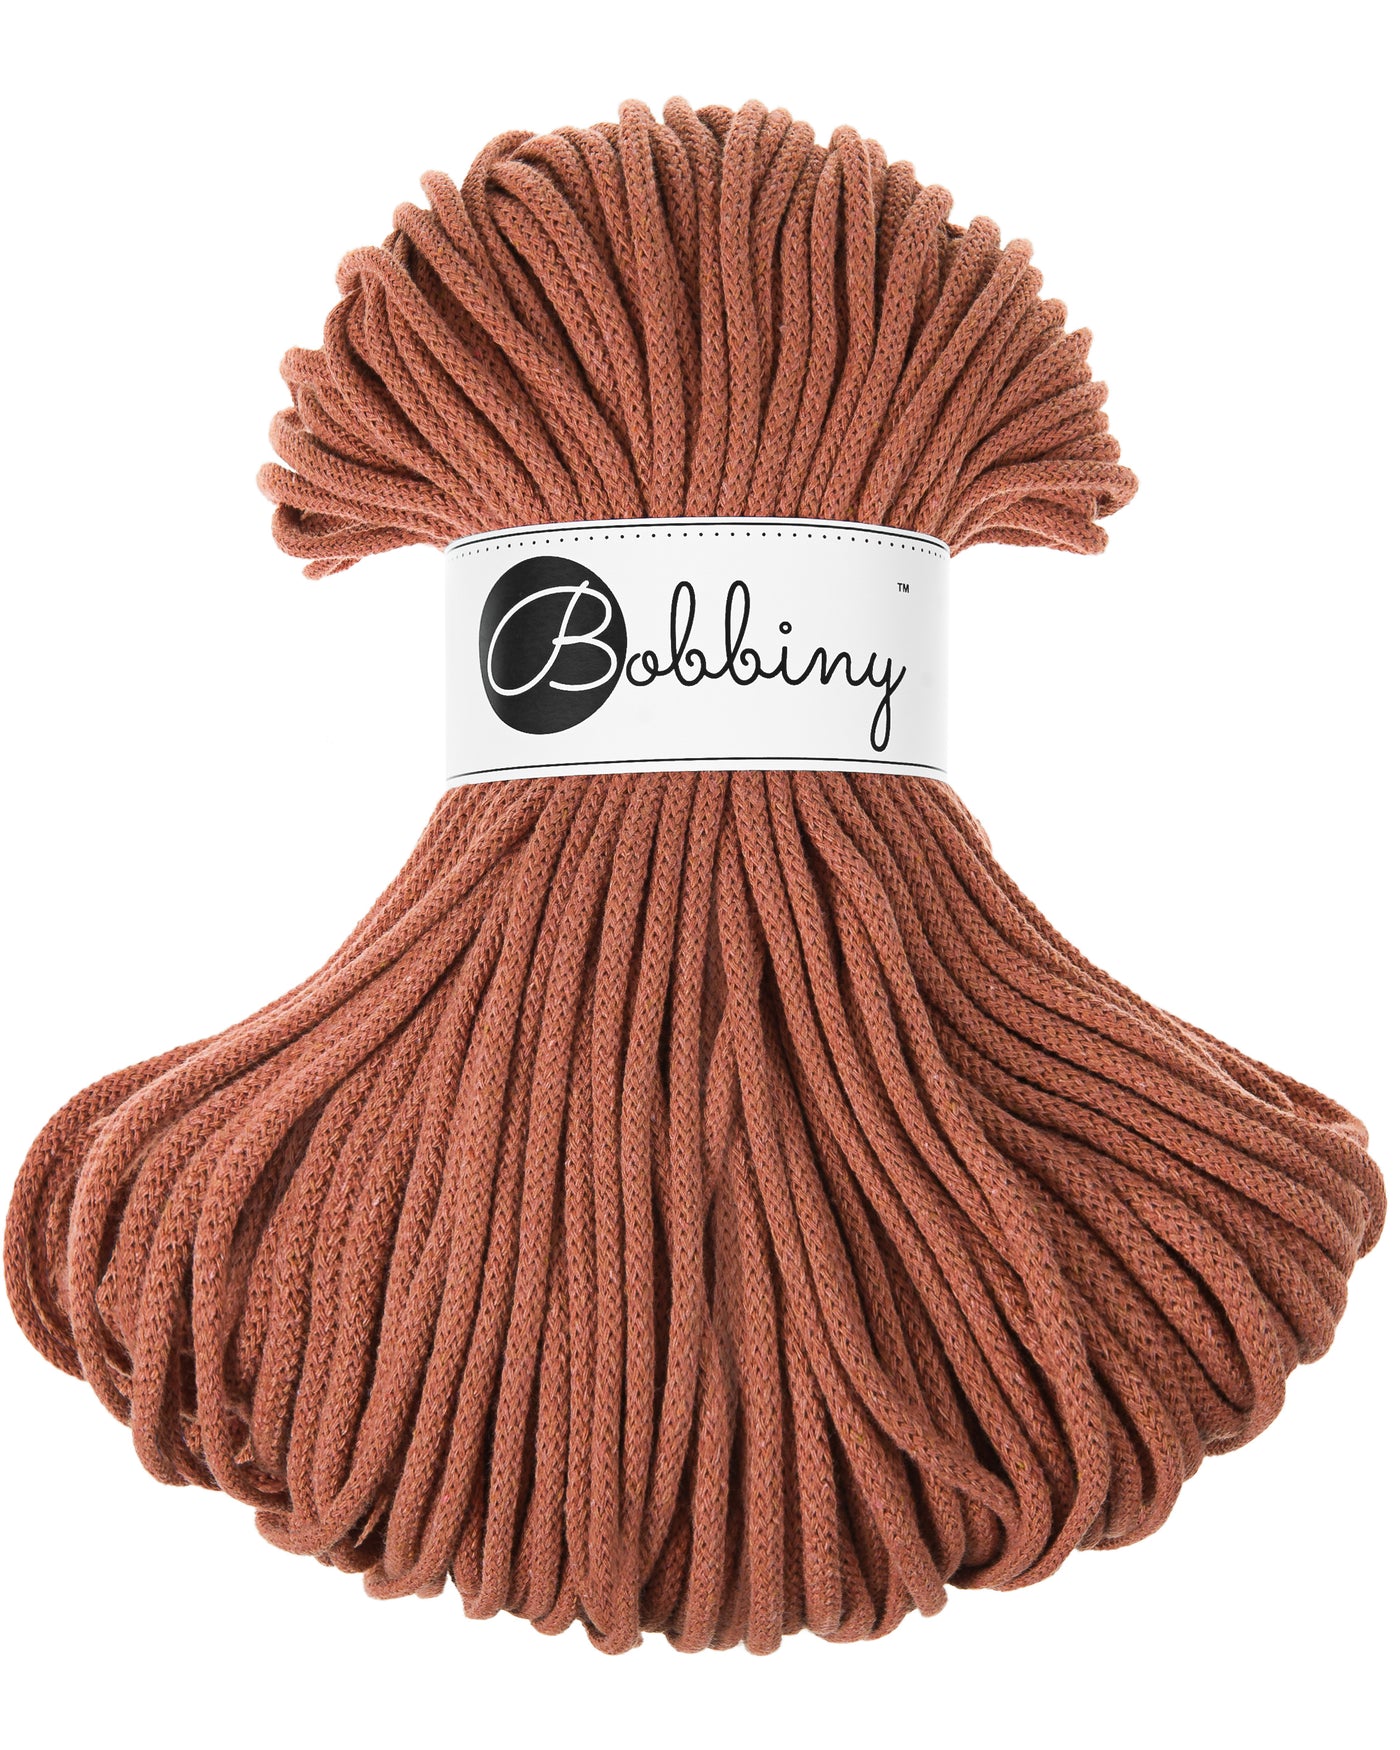 These beautiful Bobbiny cords are made in Poland from 100% recycled cottons and are non-toxic, certified safe for children and meet certified worldwide textile standards.  3mm Diameter  100 metres Length  Recommended for use with 8-10mm crochet or knitting needles.  Cotton inner and outer layers, perfect for use with Macrame, Crochet or Knitting.